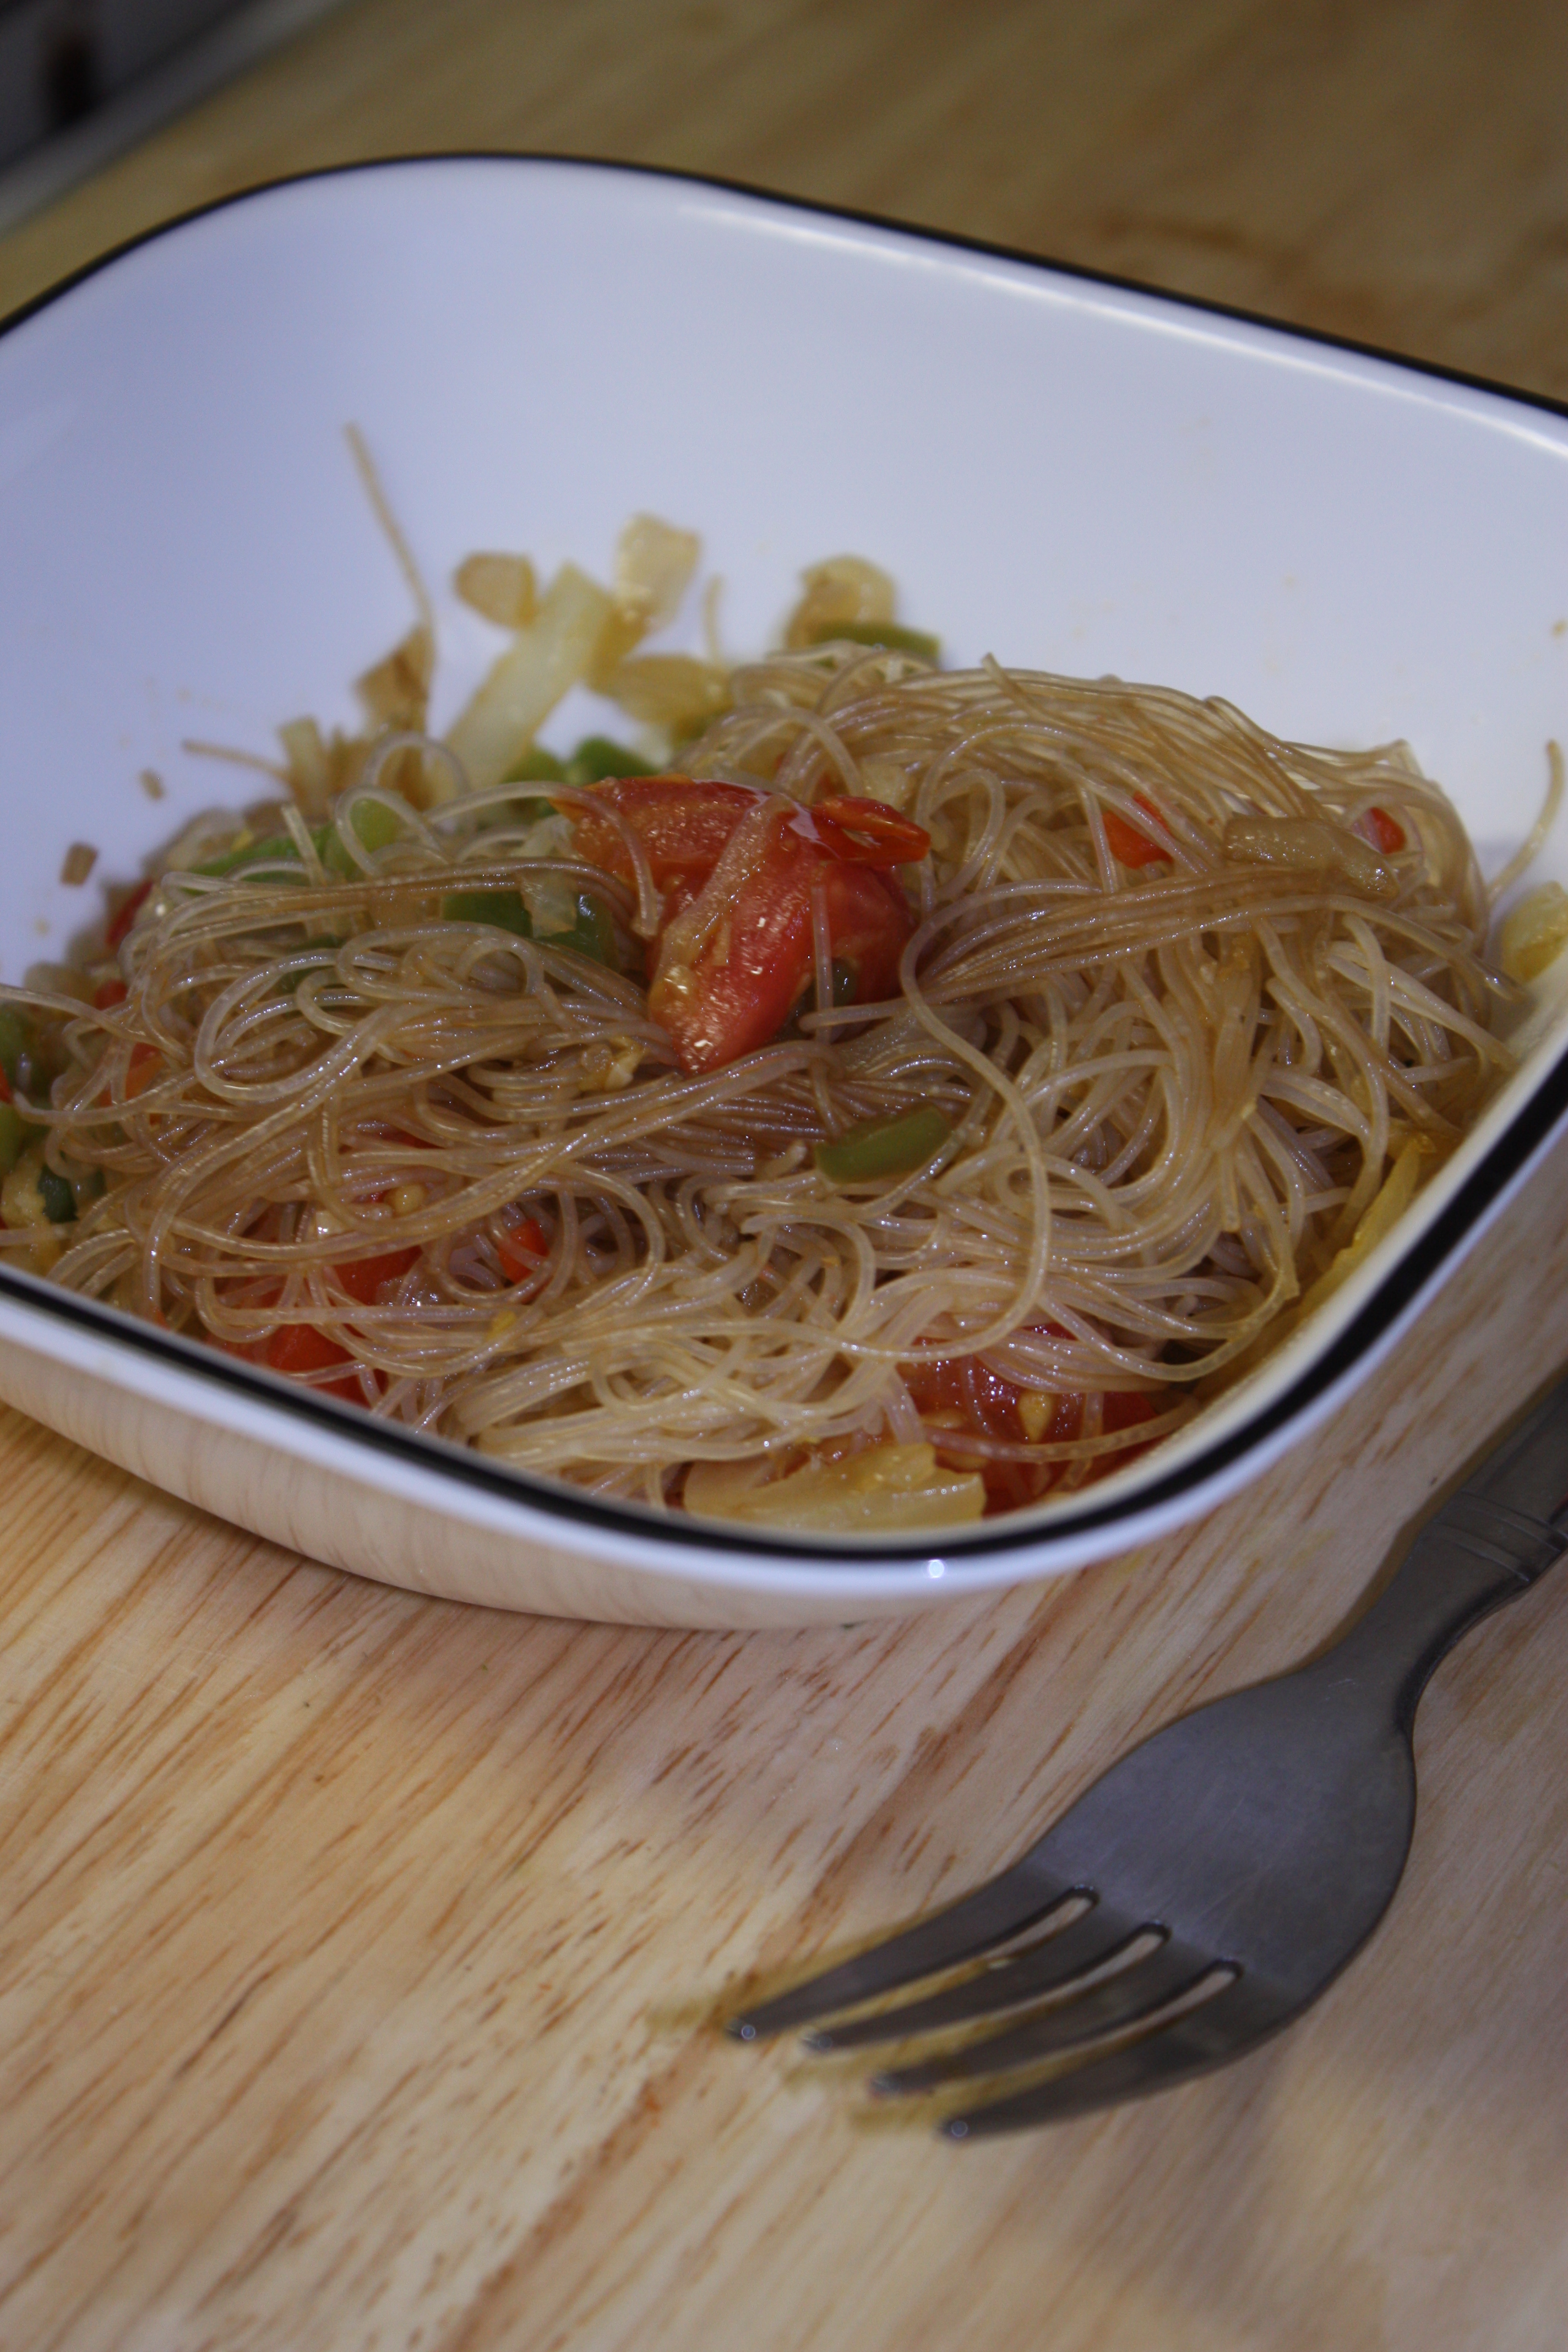 Drunkard Noodles is a simple, quick dinner. It is a quick meal to make with stir-fry rice noodles, which are super thin then it is flavored with soy sauce, basil and lemon zest. It is also perfect for less than $10 dinner.